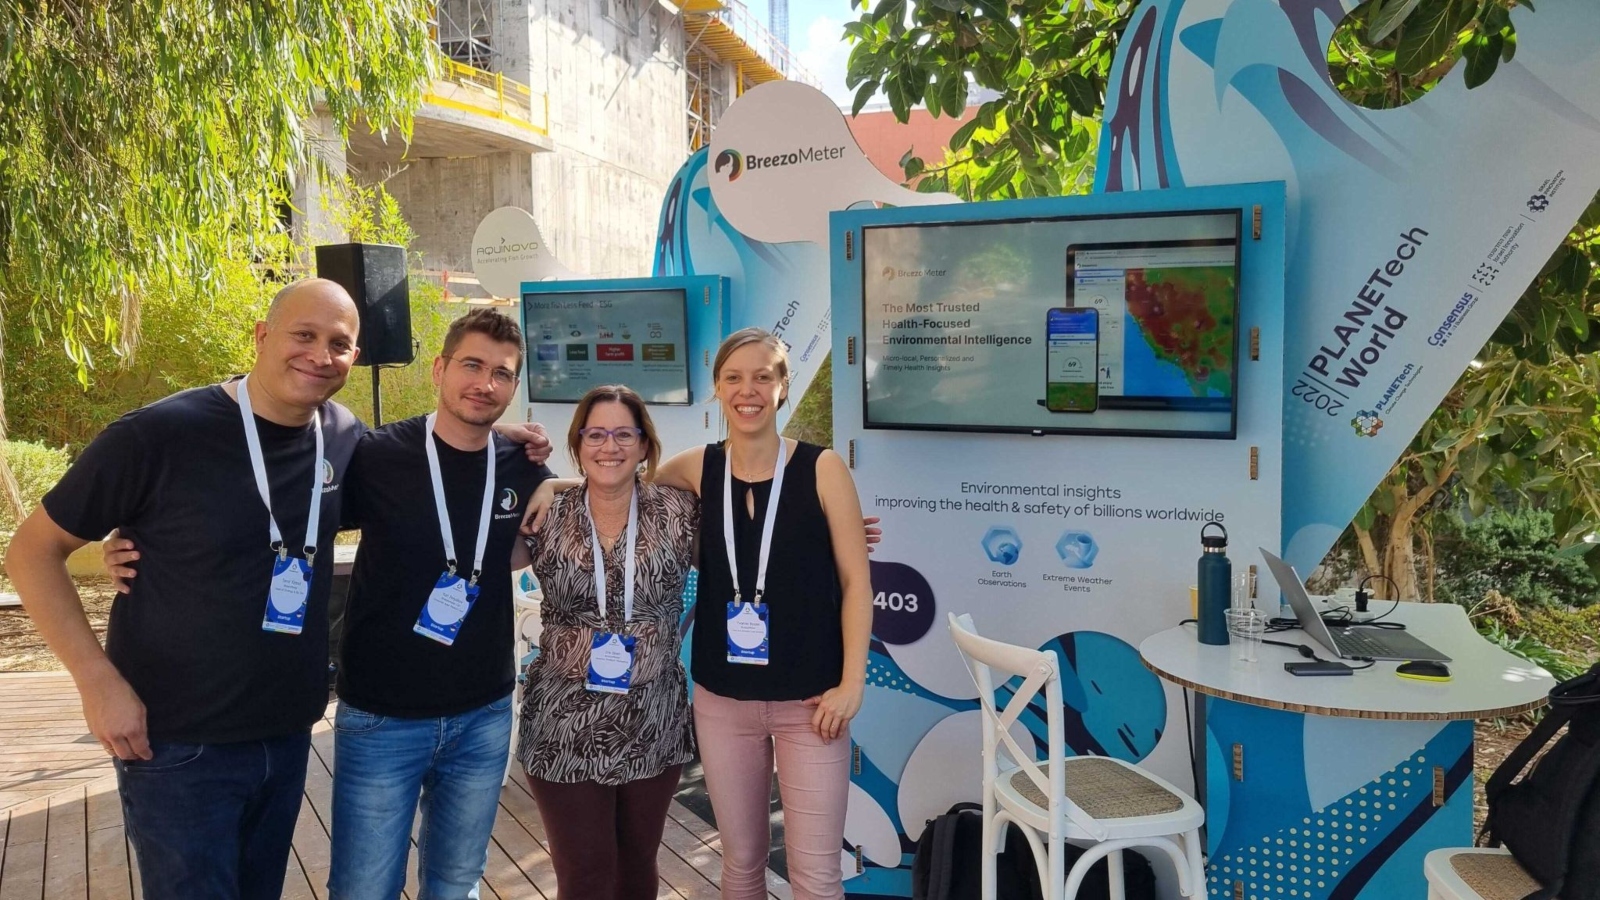 BreezoMeter personnel manning a booth at the PLANETech World climate tech conference in Tel Aviv, September 21, 2022. Photo courtesy of BreezoMeter